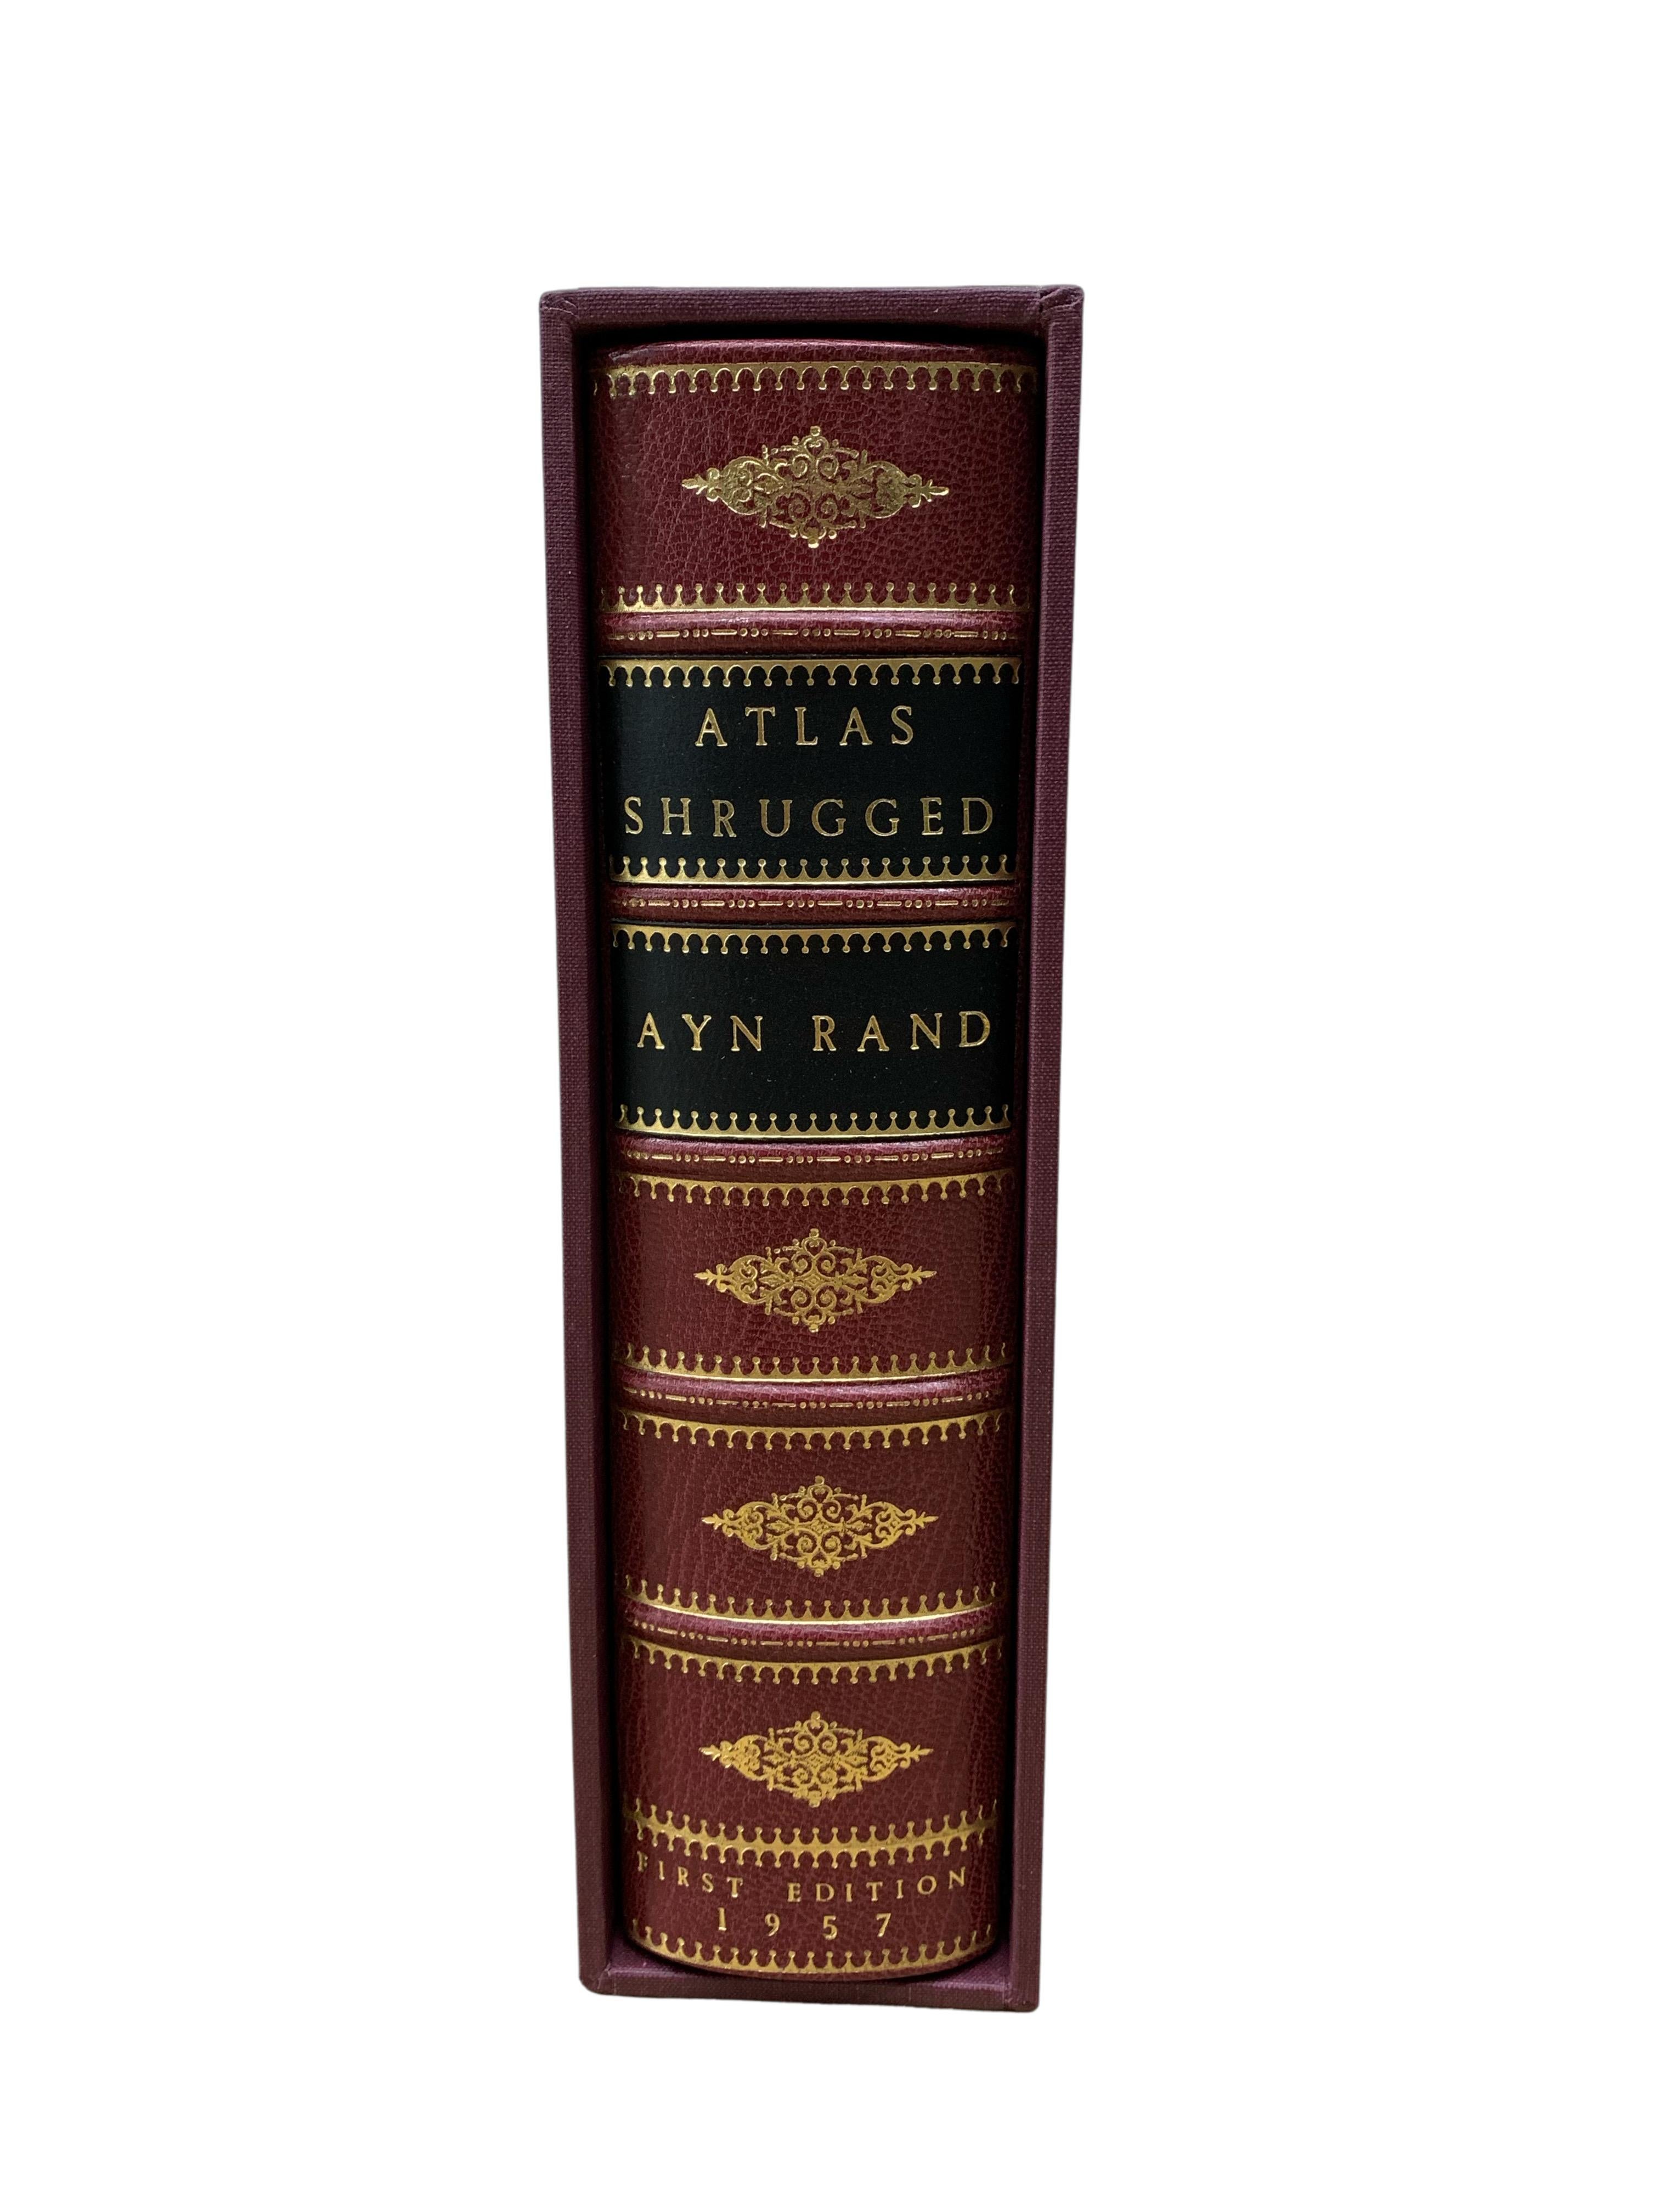 Mid-20th Century Atlas Shrugged by Ayn Rand, First Edition, First Printing, 1957